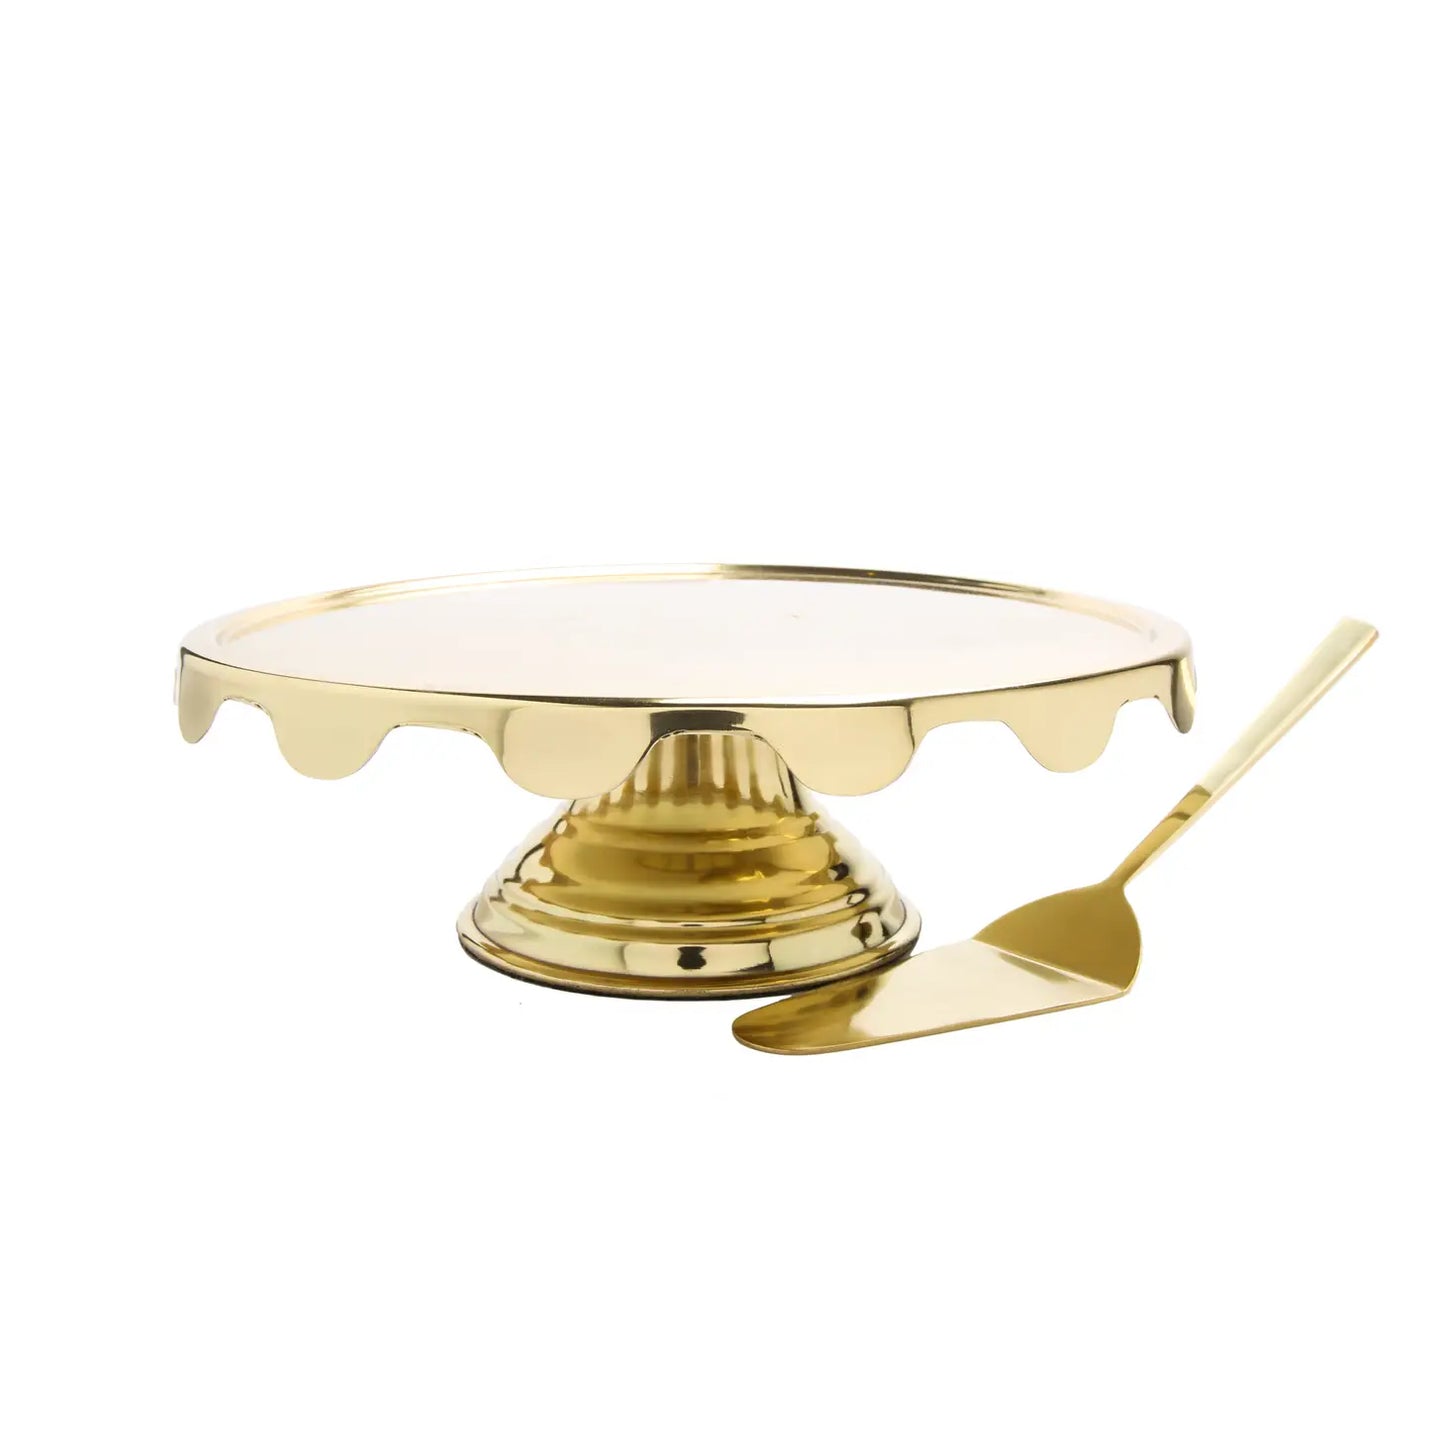 Gold Cake Stand and Server